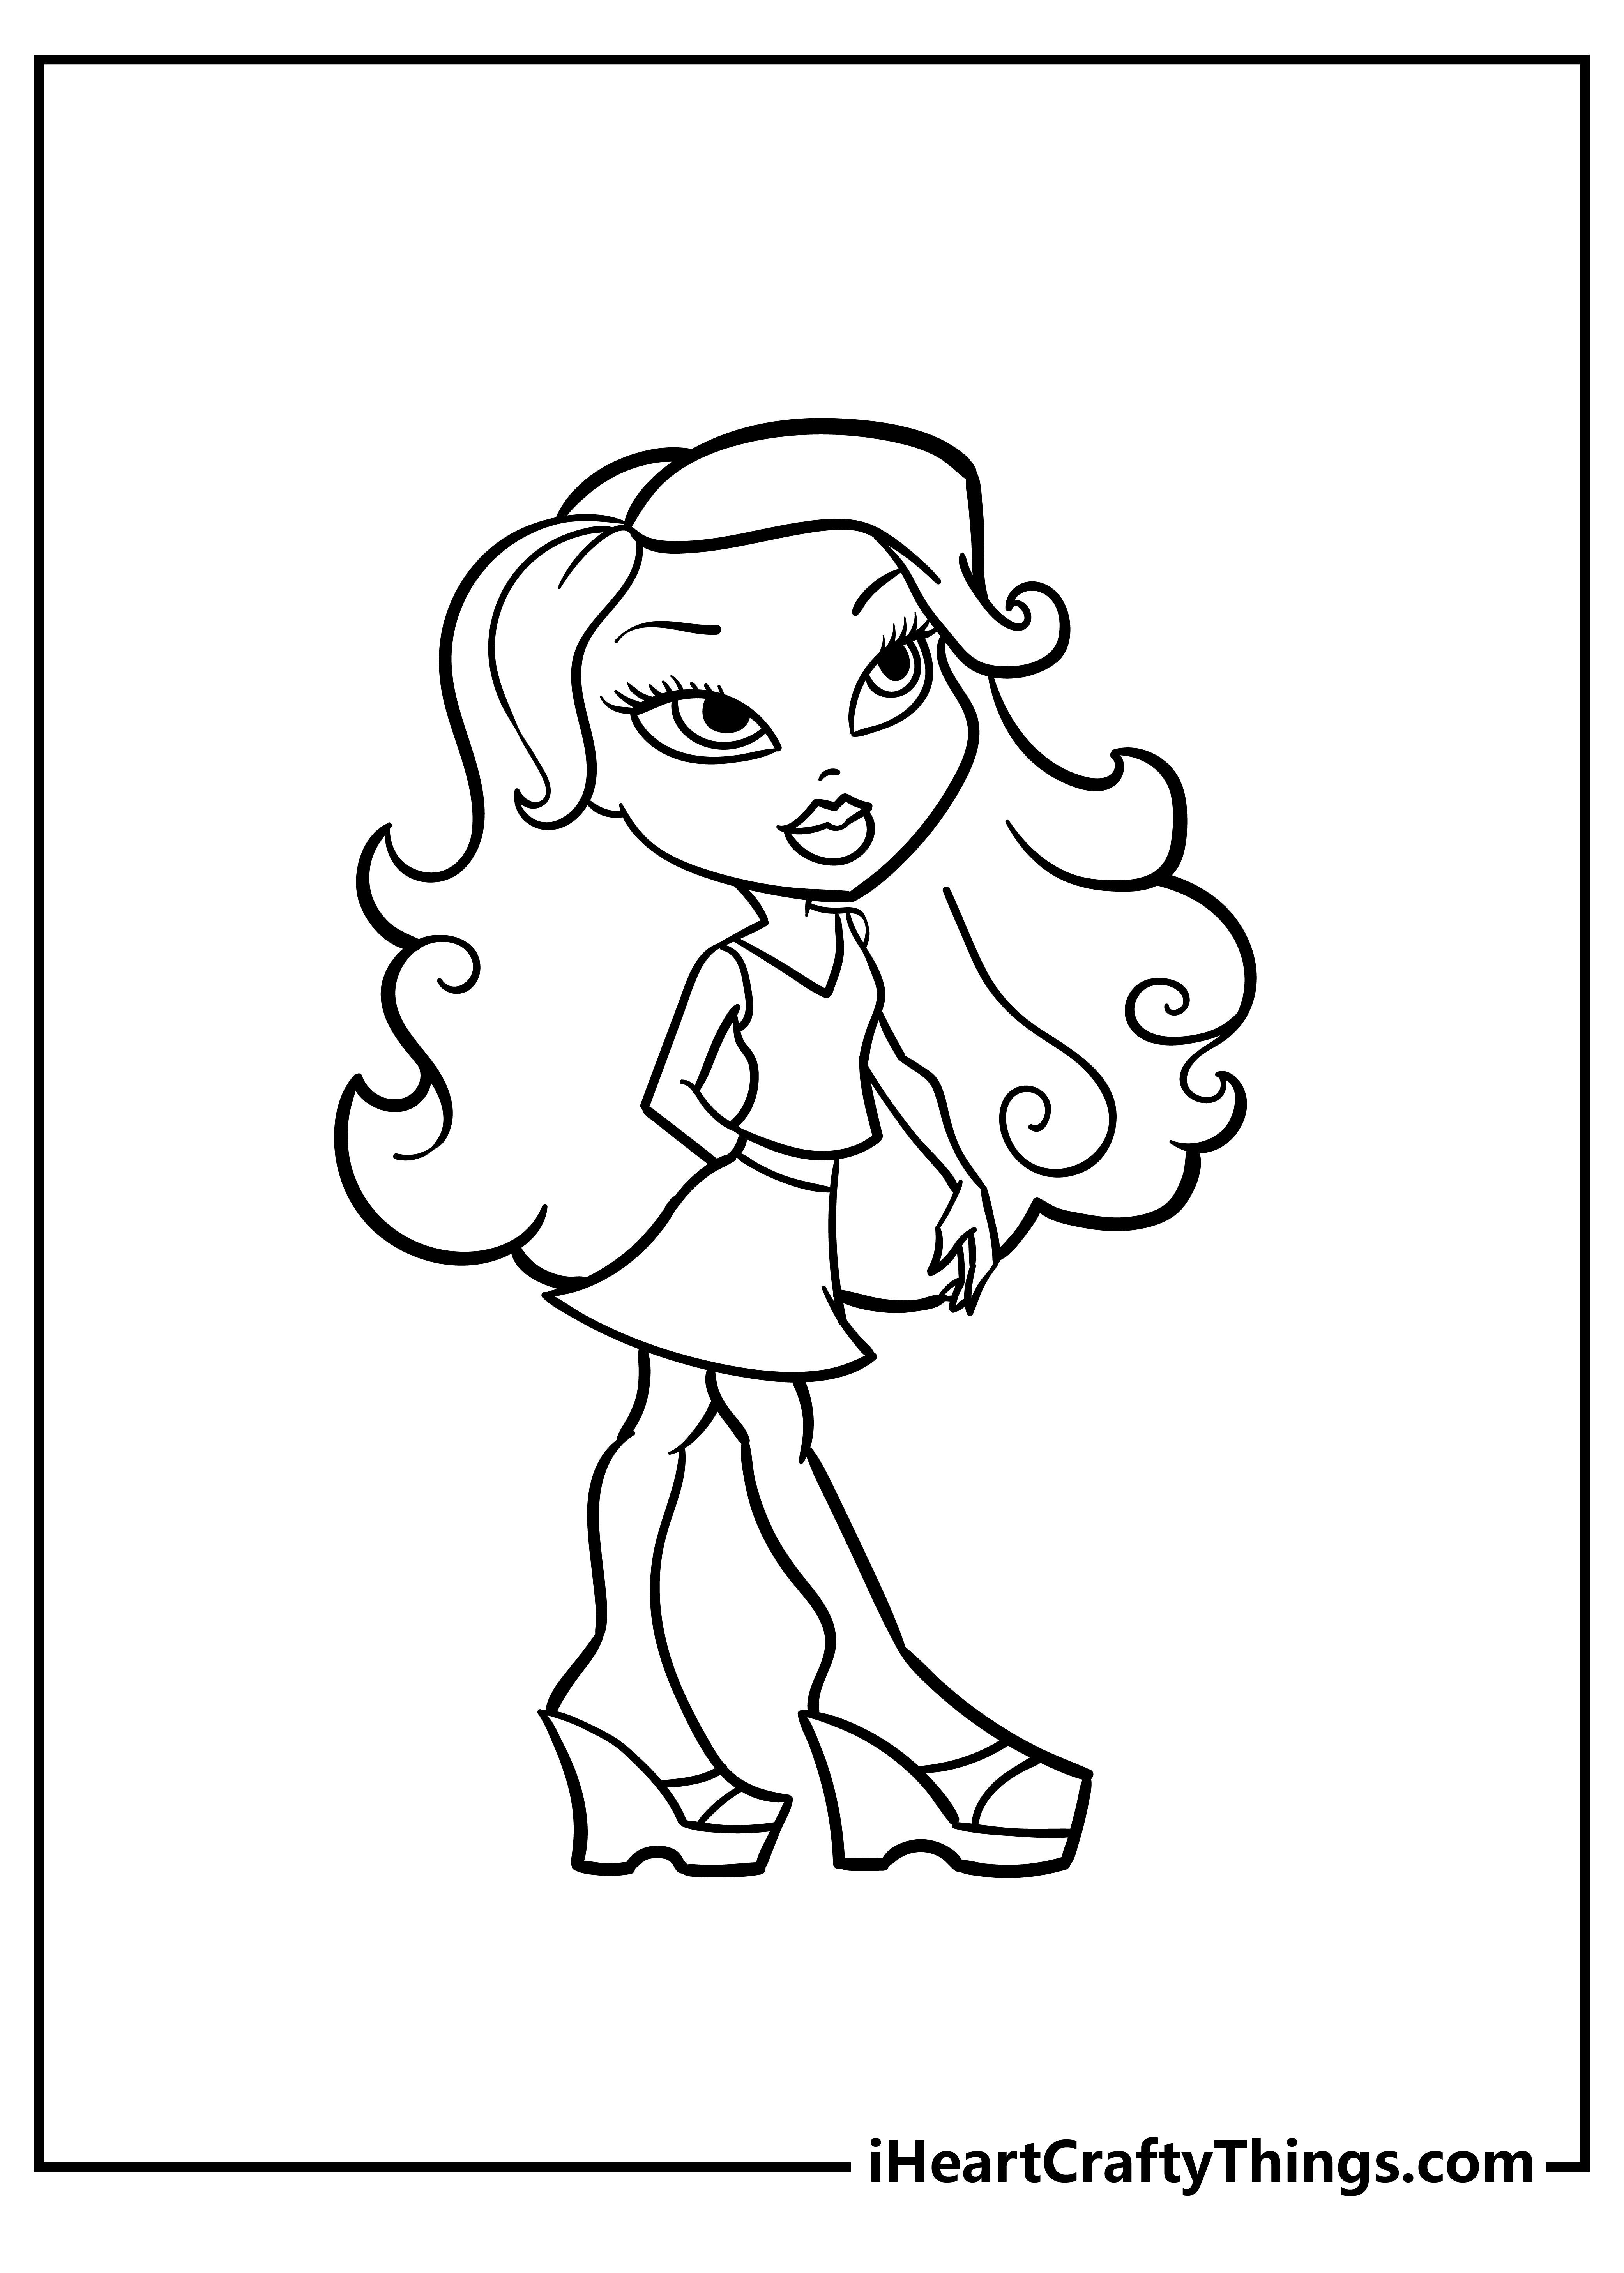 Bratz Coloring Pages for adults free printable